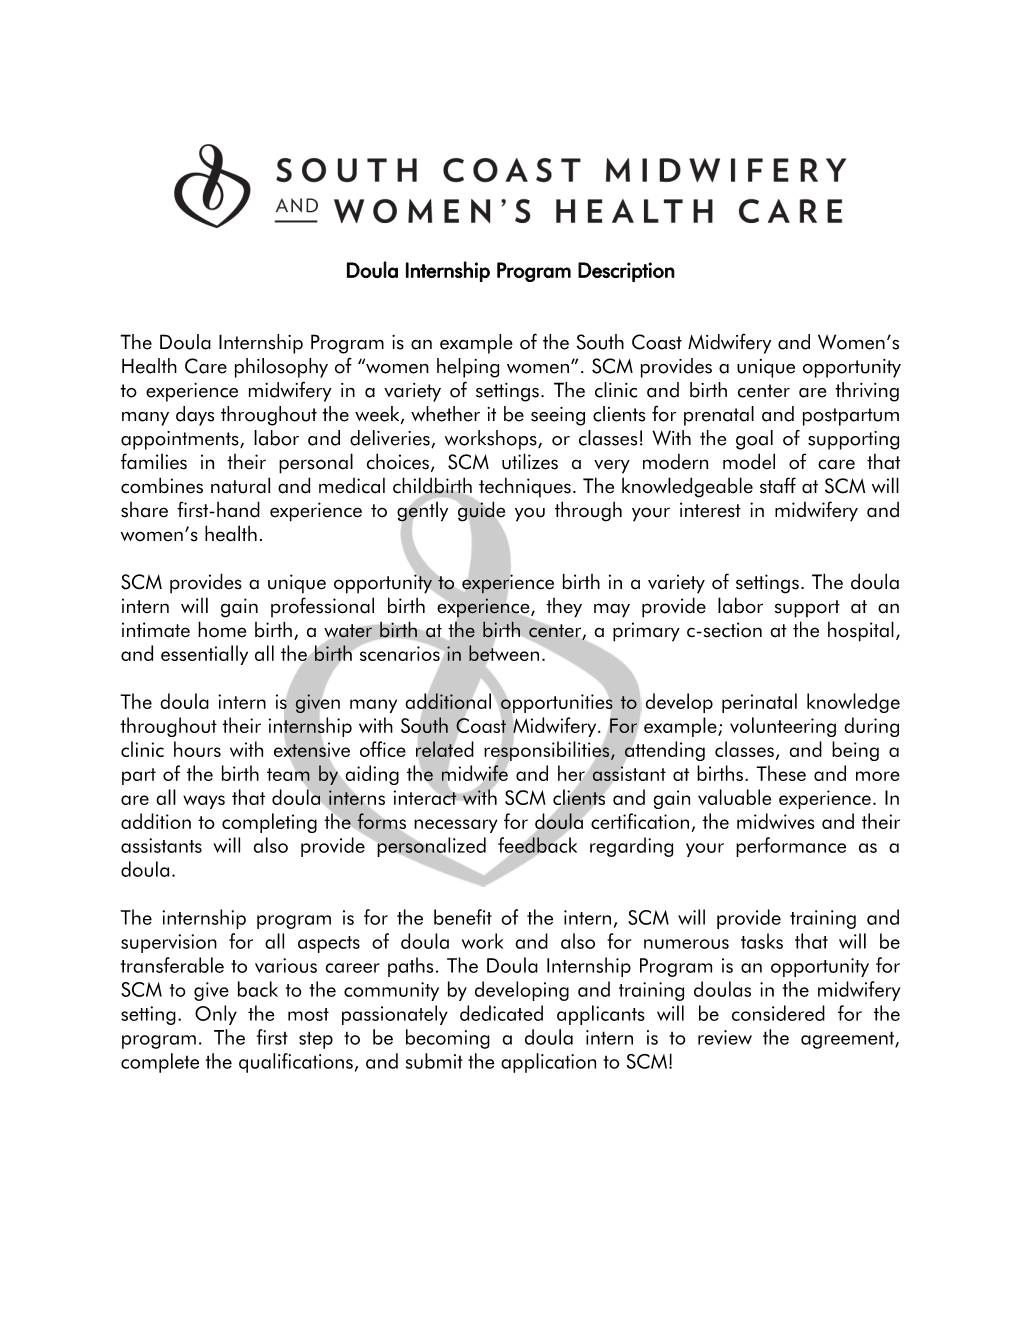 The Doula Internship Progm Is an Example of South Coast Midwifery's Philosophy of “Women Helping Women”